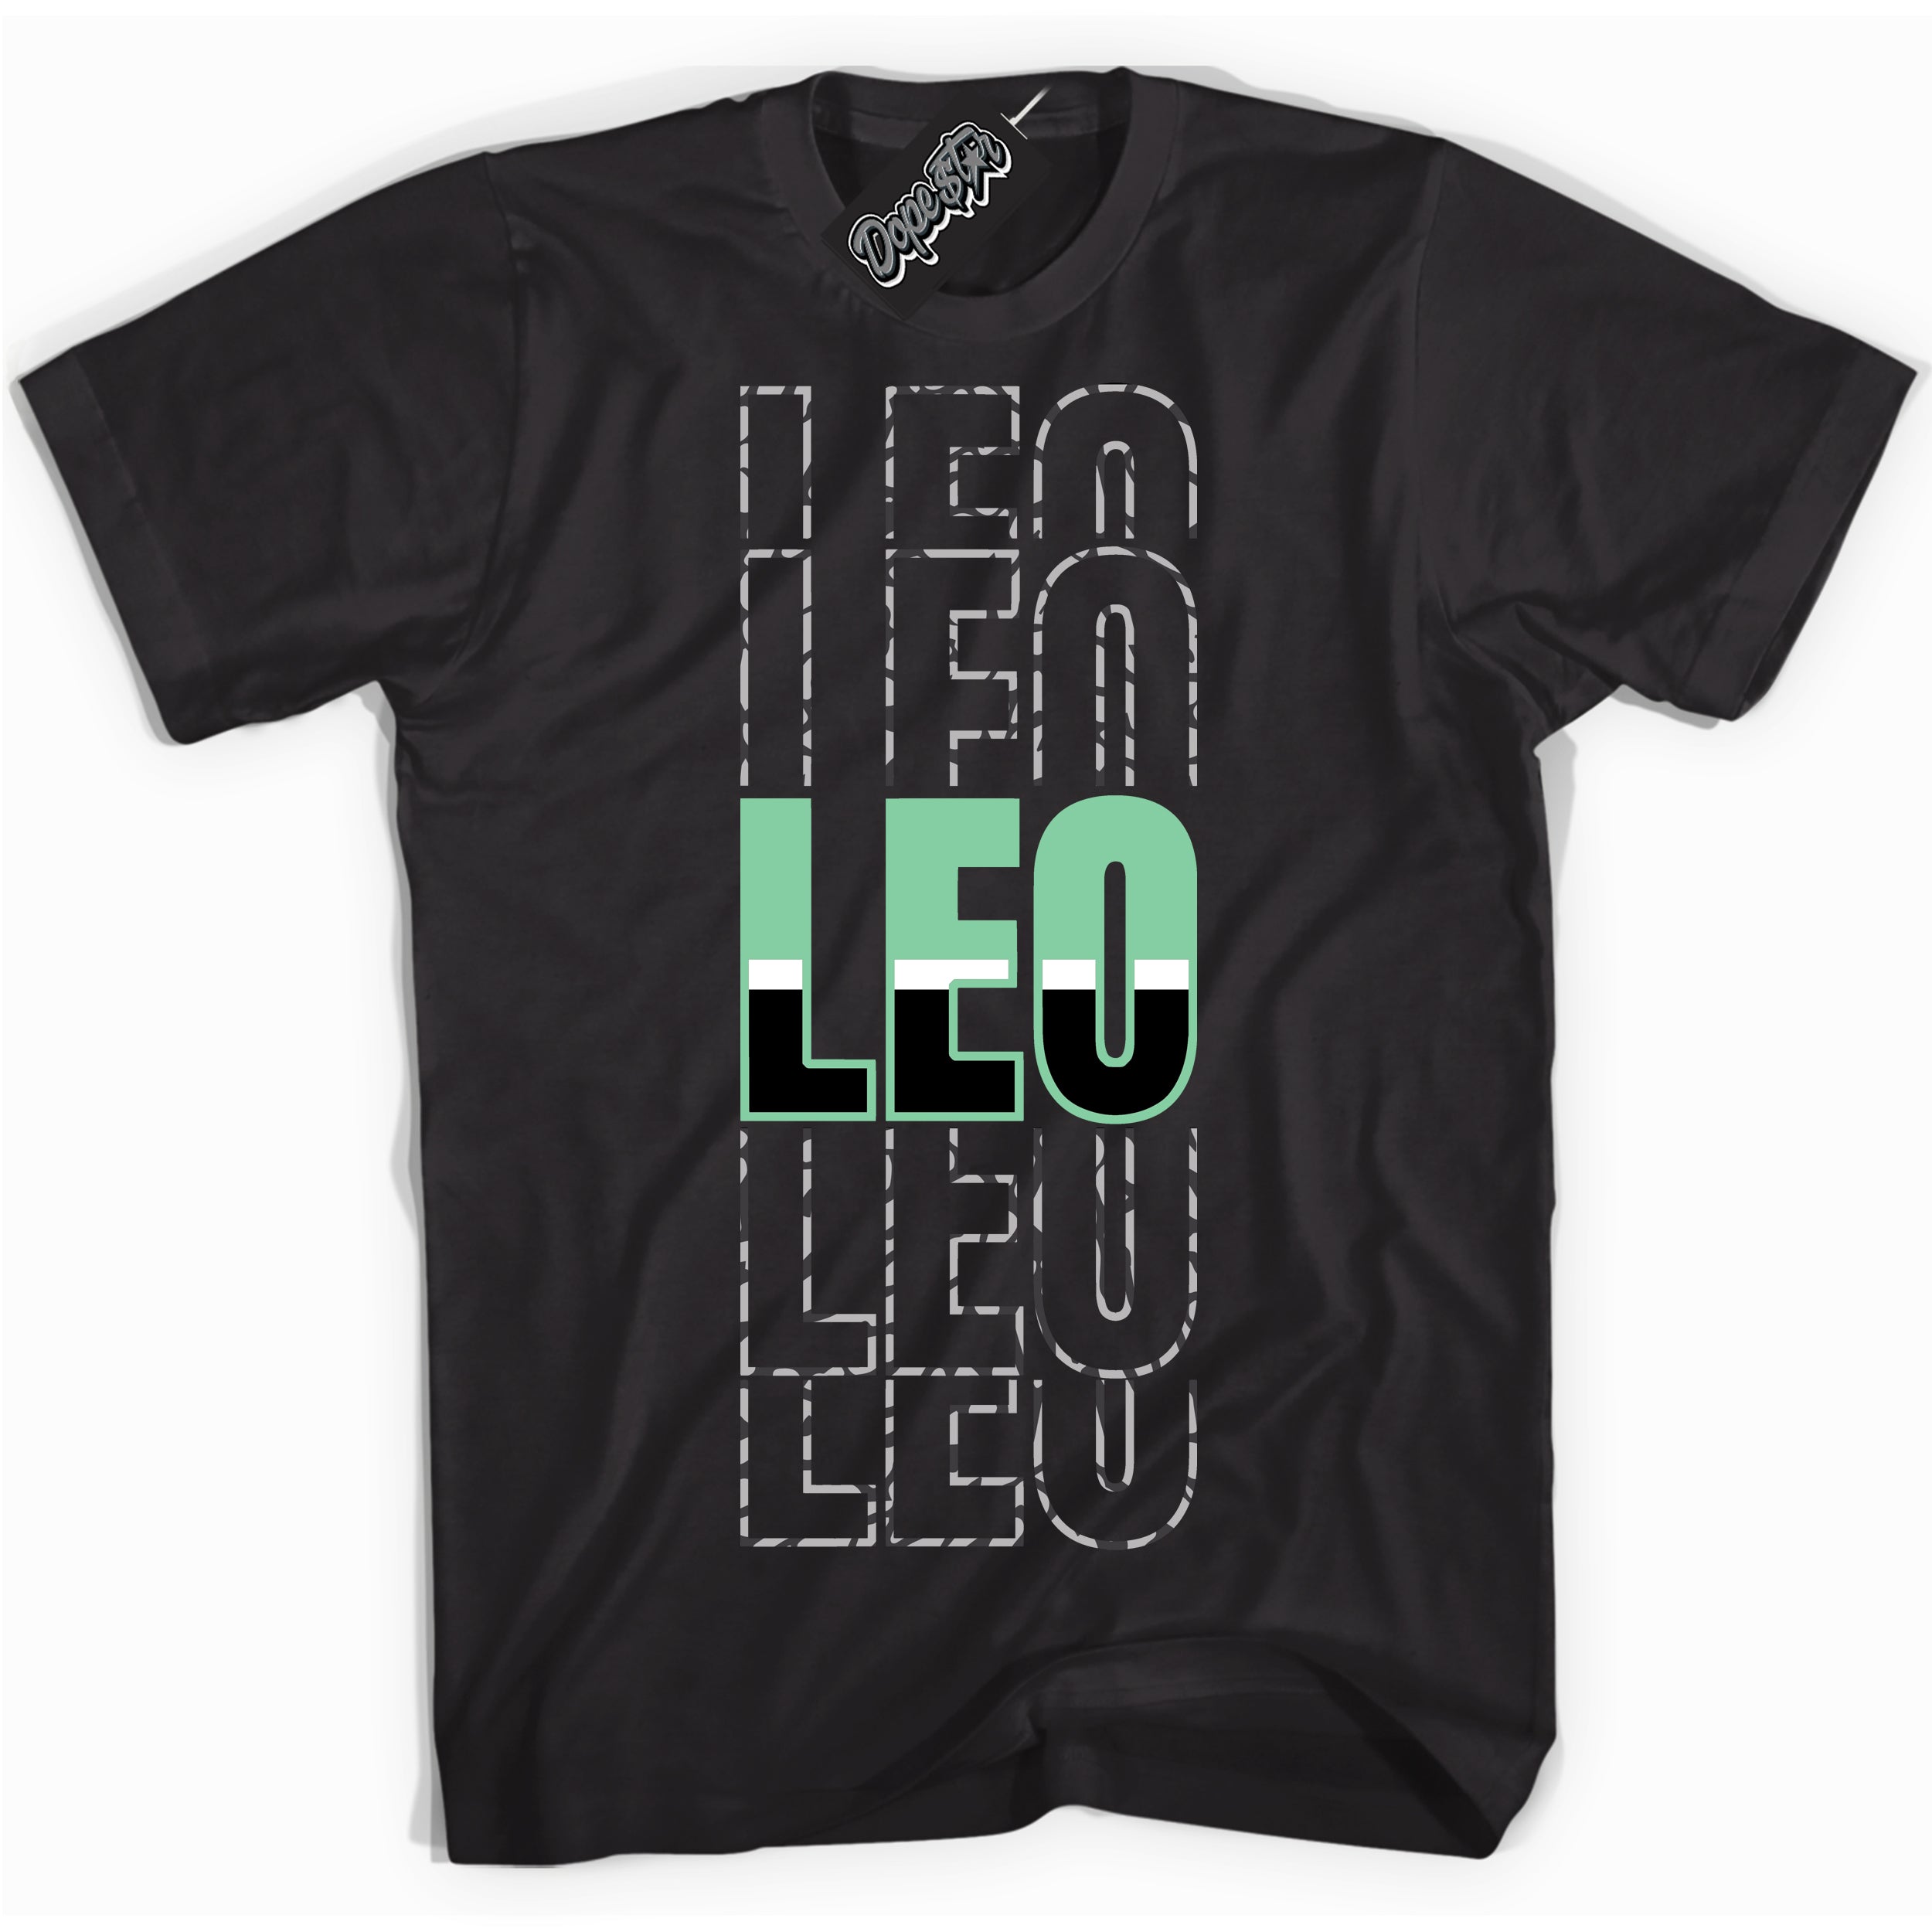 Cool Black graphic tee with “ Leo ” design, that perfectly matches Green Glow 3s sneakers 